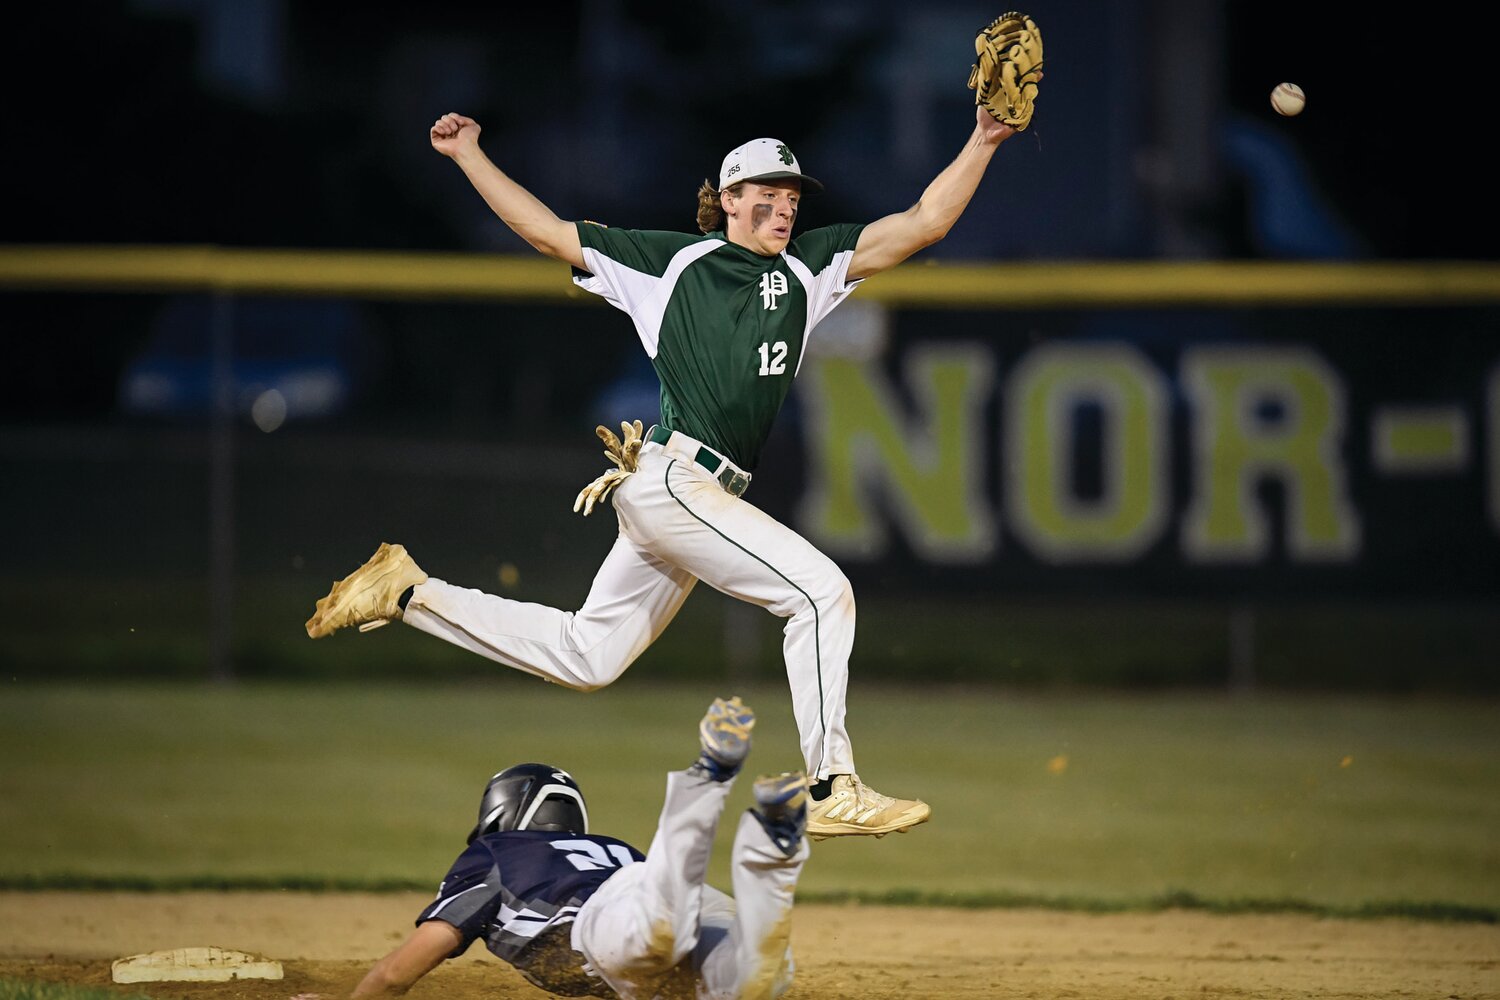 Pennridge shortstop Robbie Pliszka leaps over the slide of Quakertown’s Peyton Myers during a steal attempt in the top of the fourth inning.